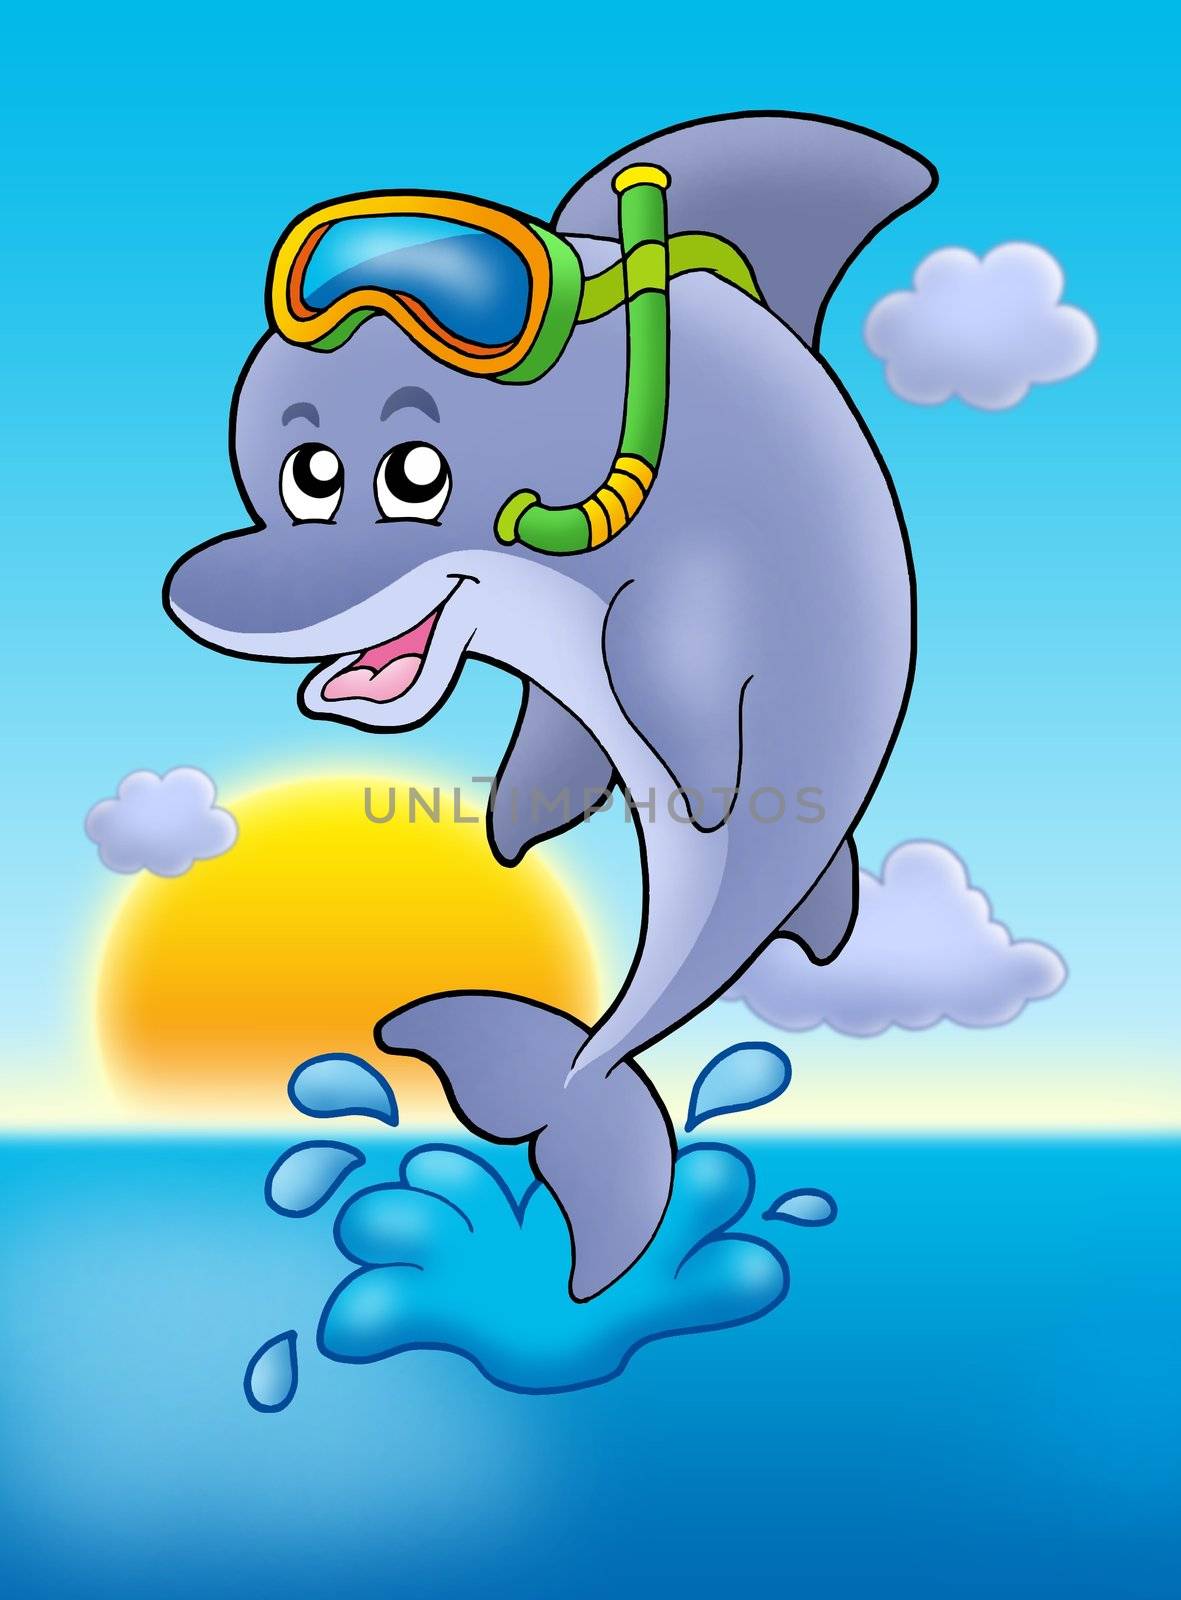 Dolphin snorkel diver with sunset - color illustration.